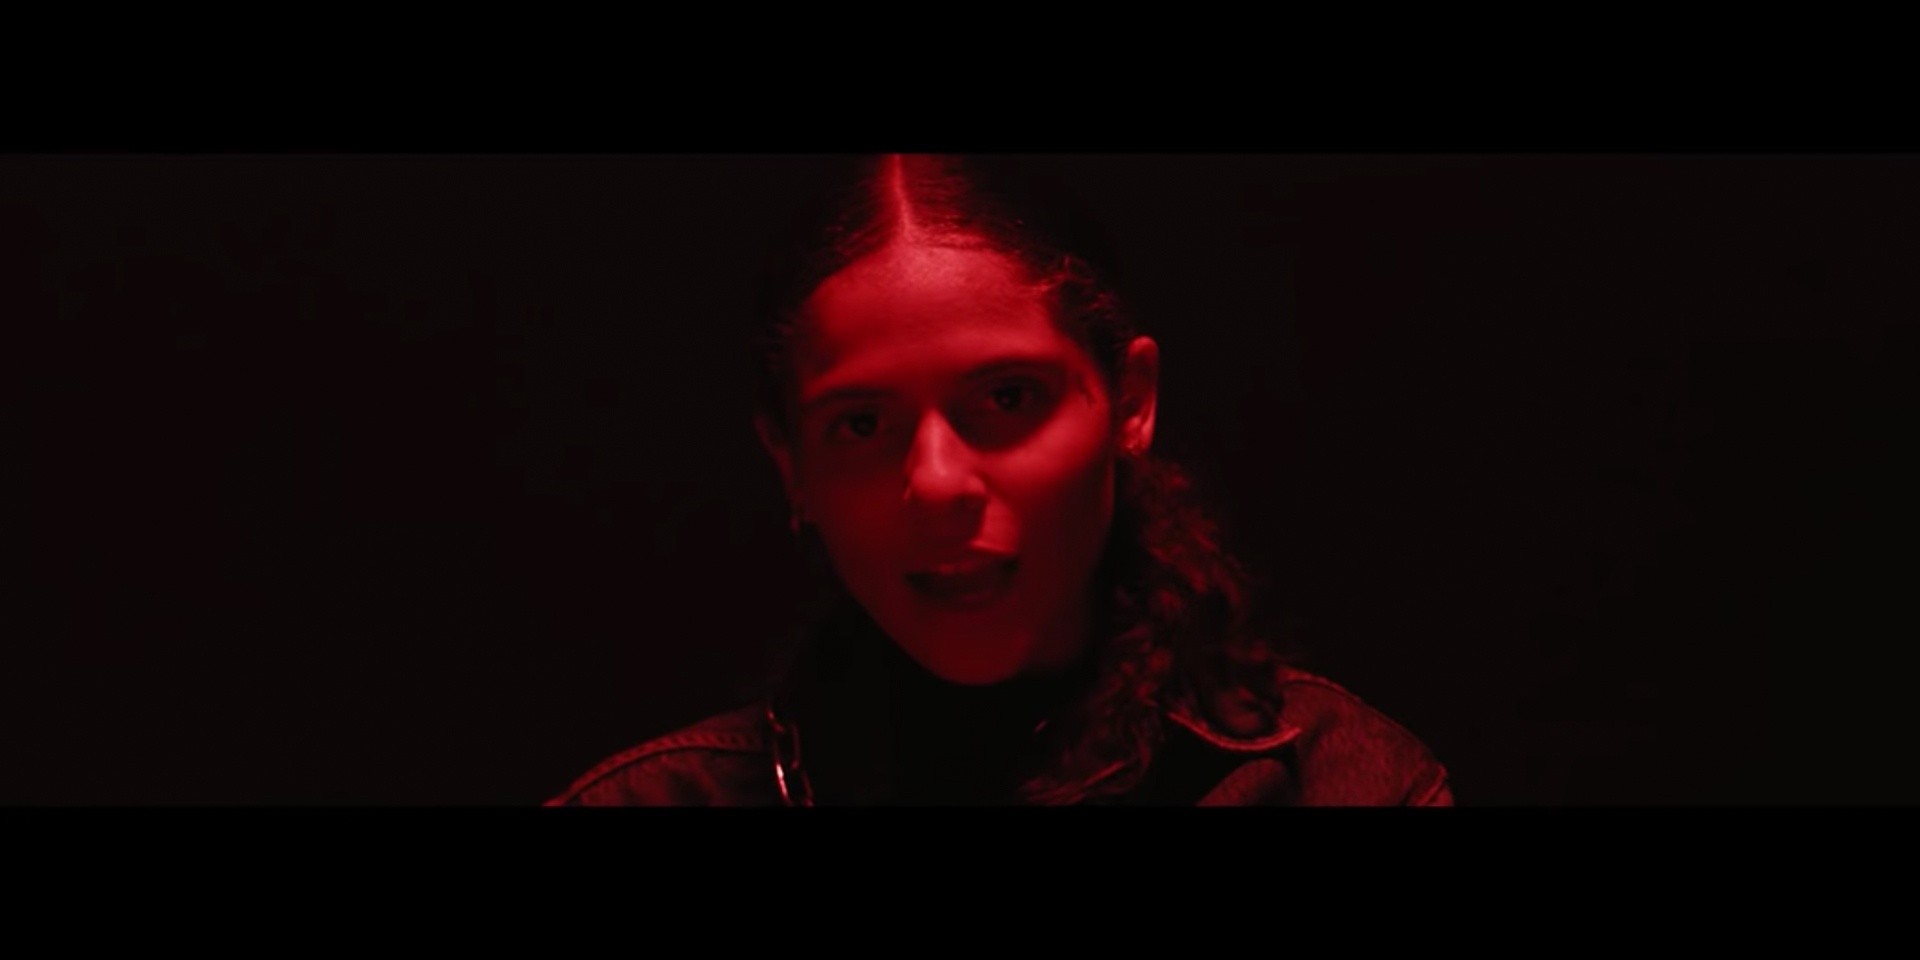 Breakout artist 070 Shake, riding the Ye wave, releases music video for 'Mirrors' – watch